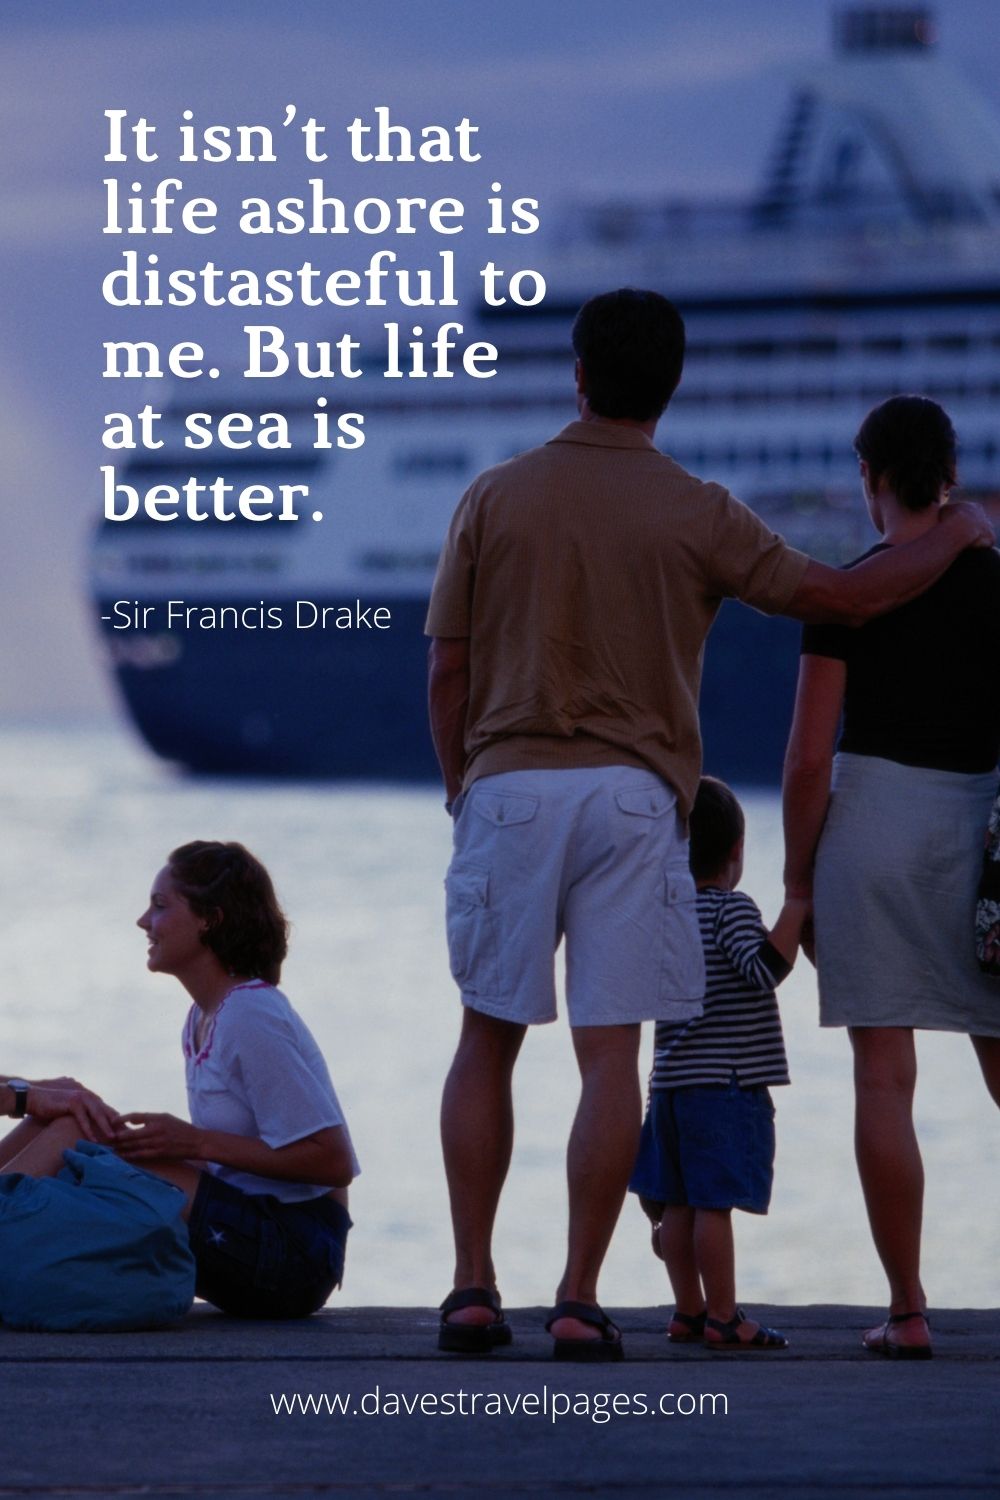 It isn’t that life ashore is distasteful to me. But life at sea is better.